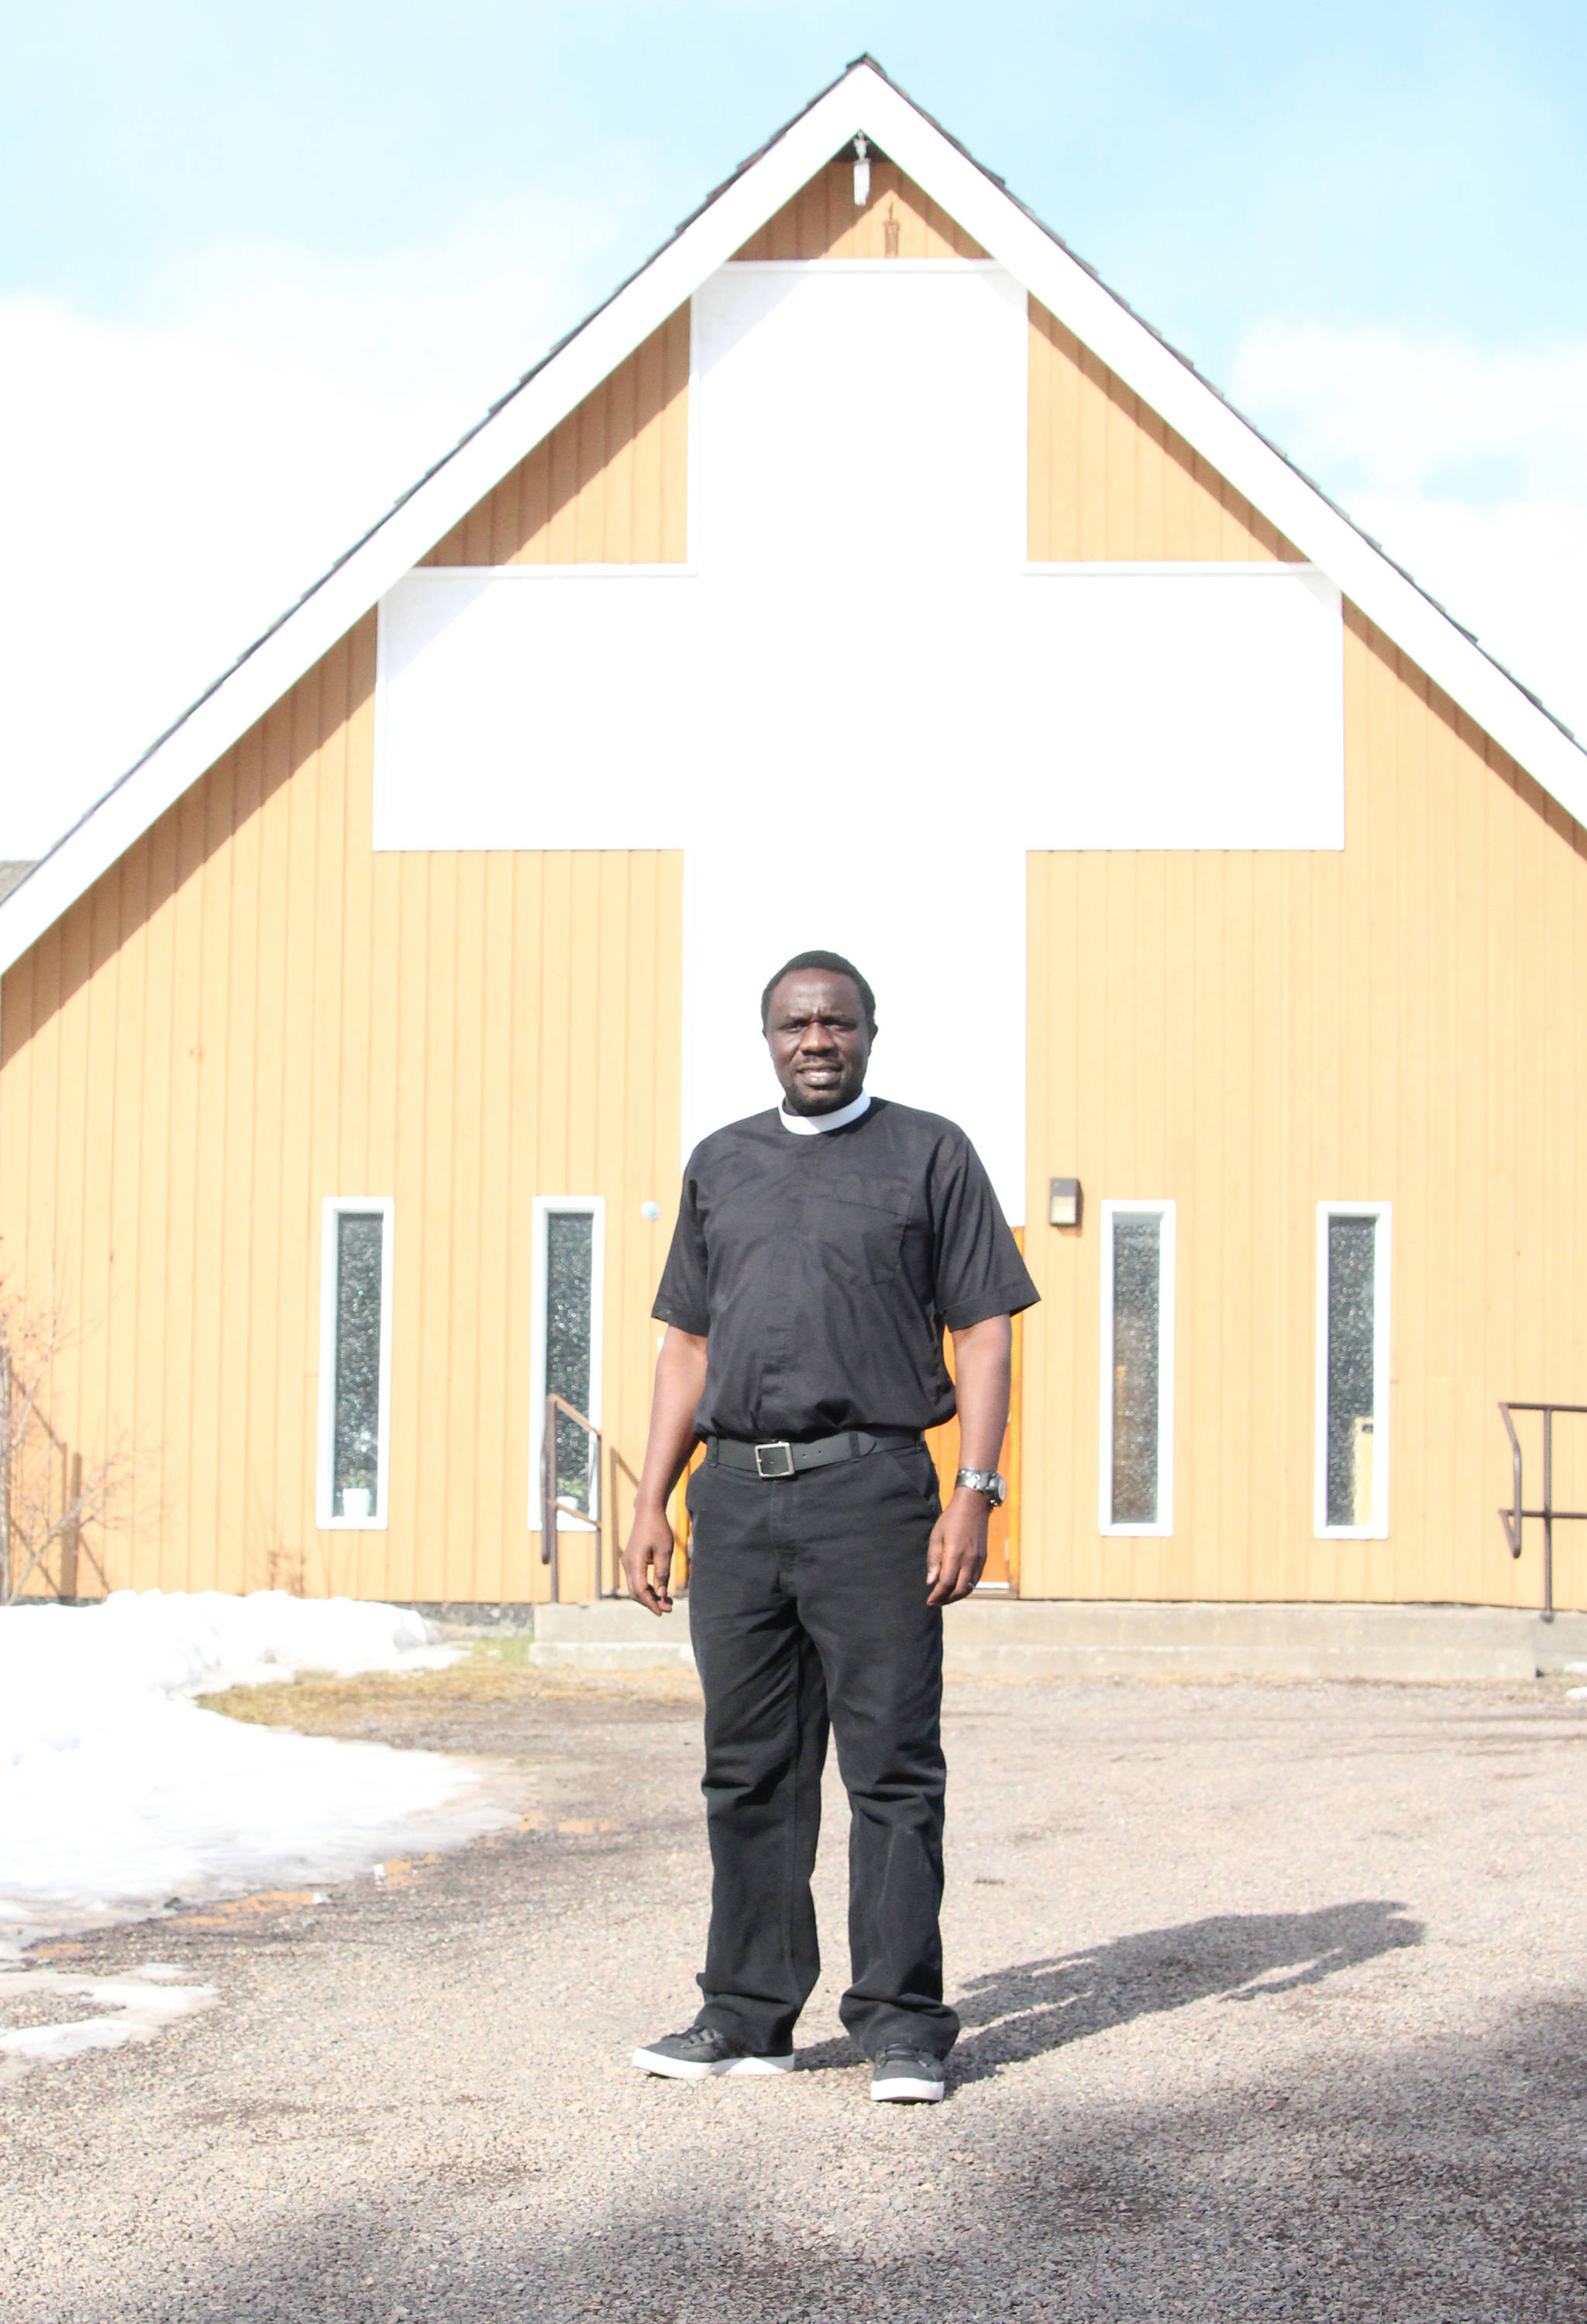 20943051_web1_200318-SIN-OUR-TOWN-fr-wilfred-alero-anglican-priest-church_1